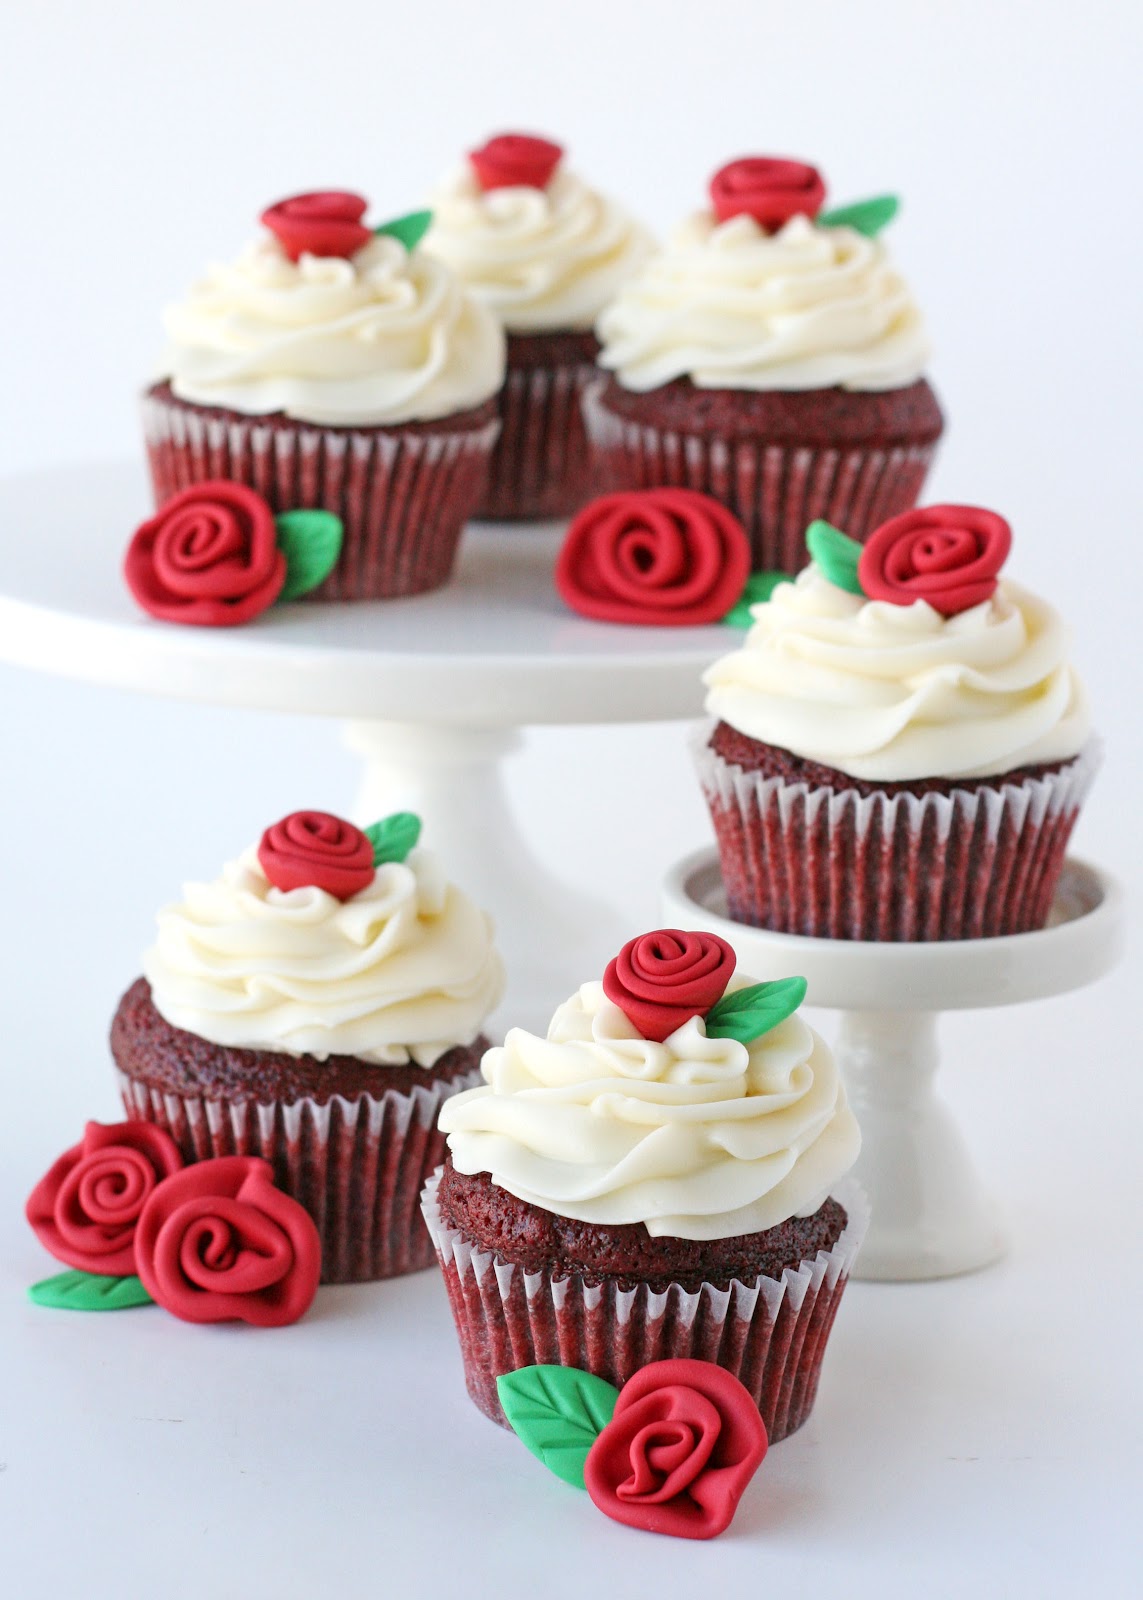 Glorious Treats: Red Velvet Cupcakes with Roses {Recipe}